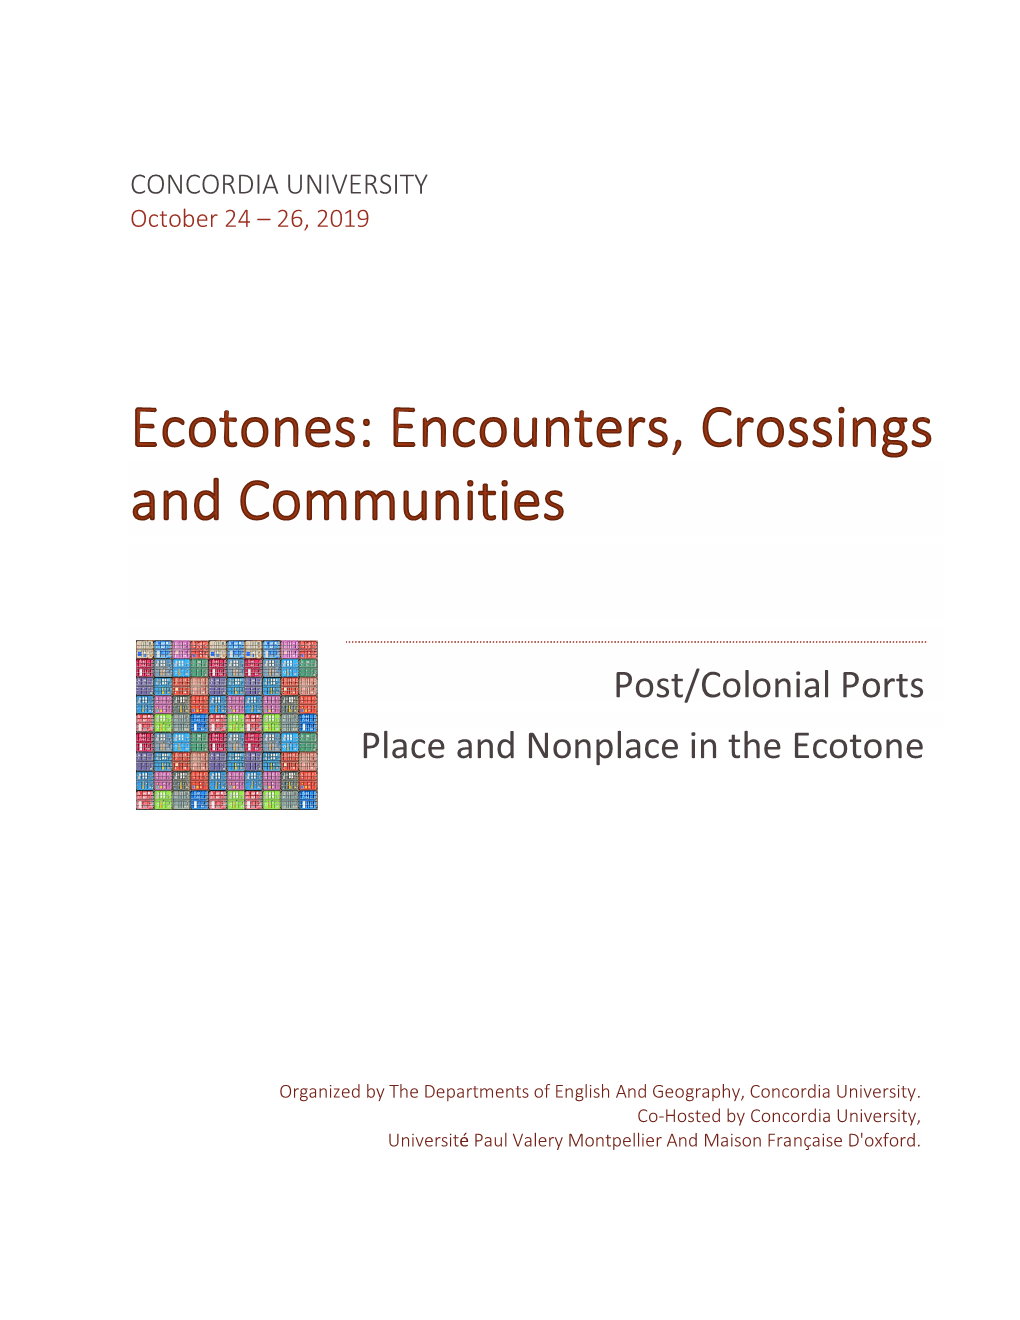 Post/Colonial Ports Place and Nonplace in the Ecotone